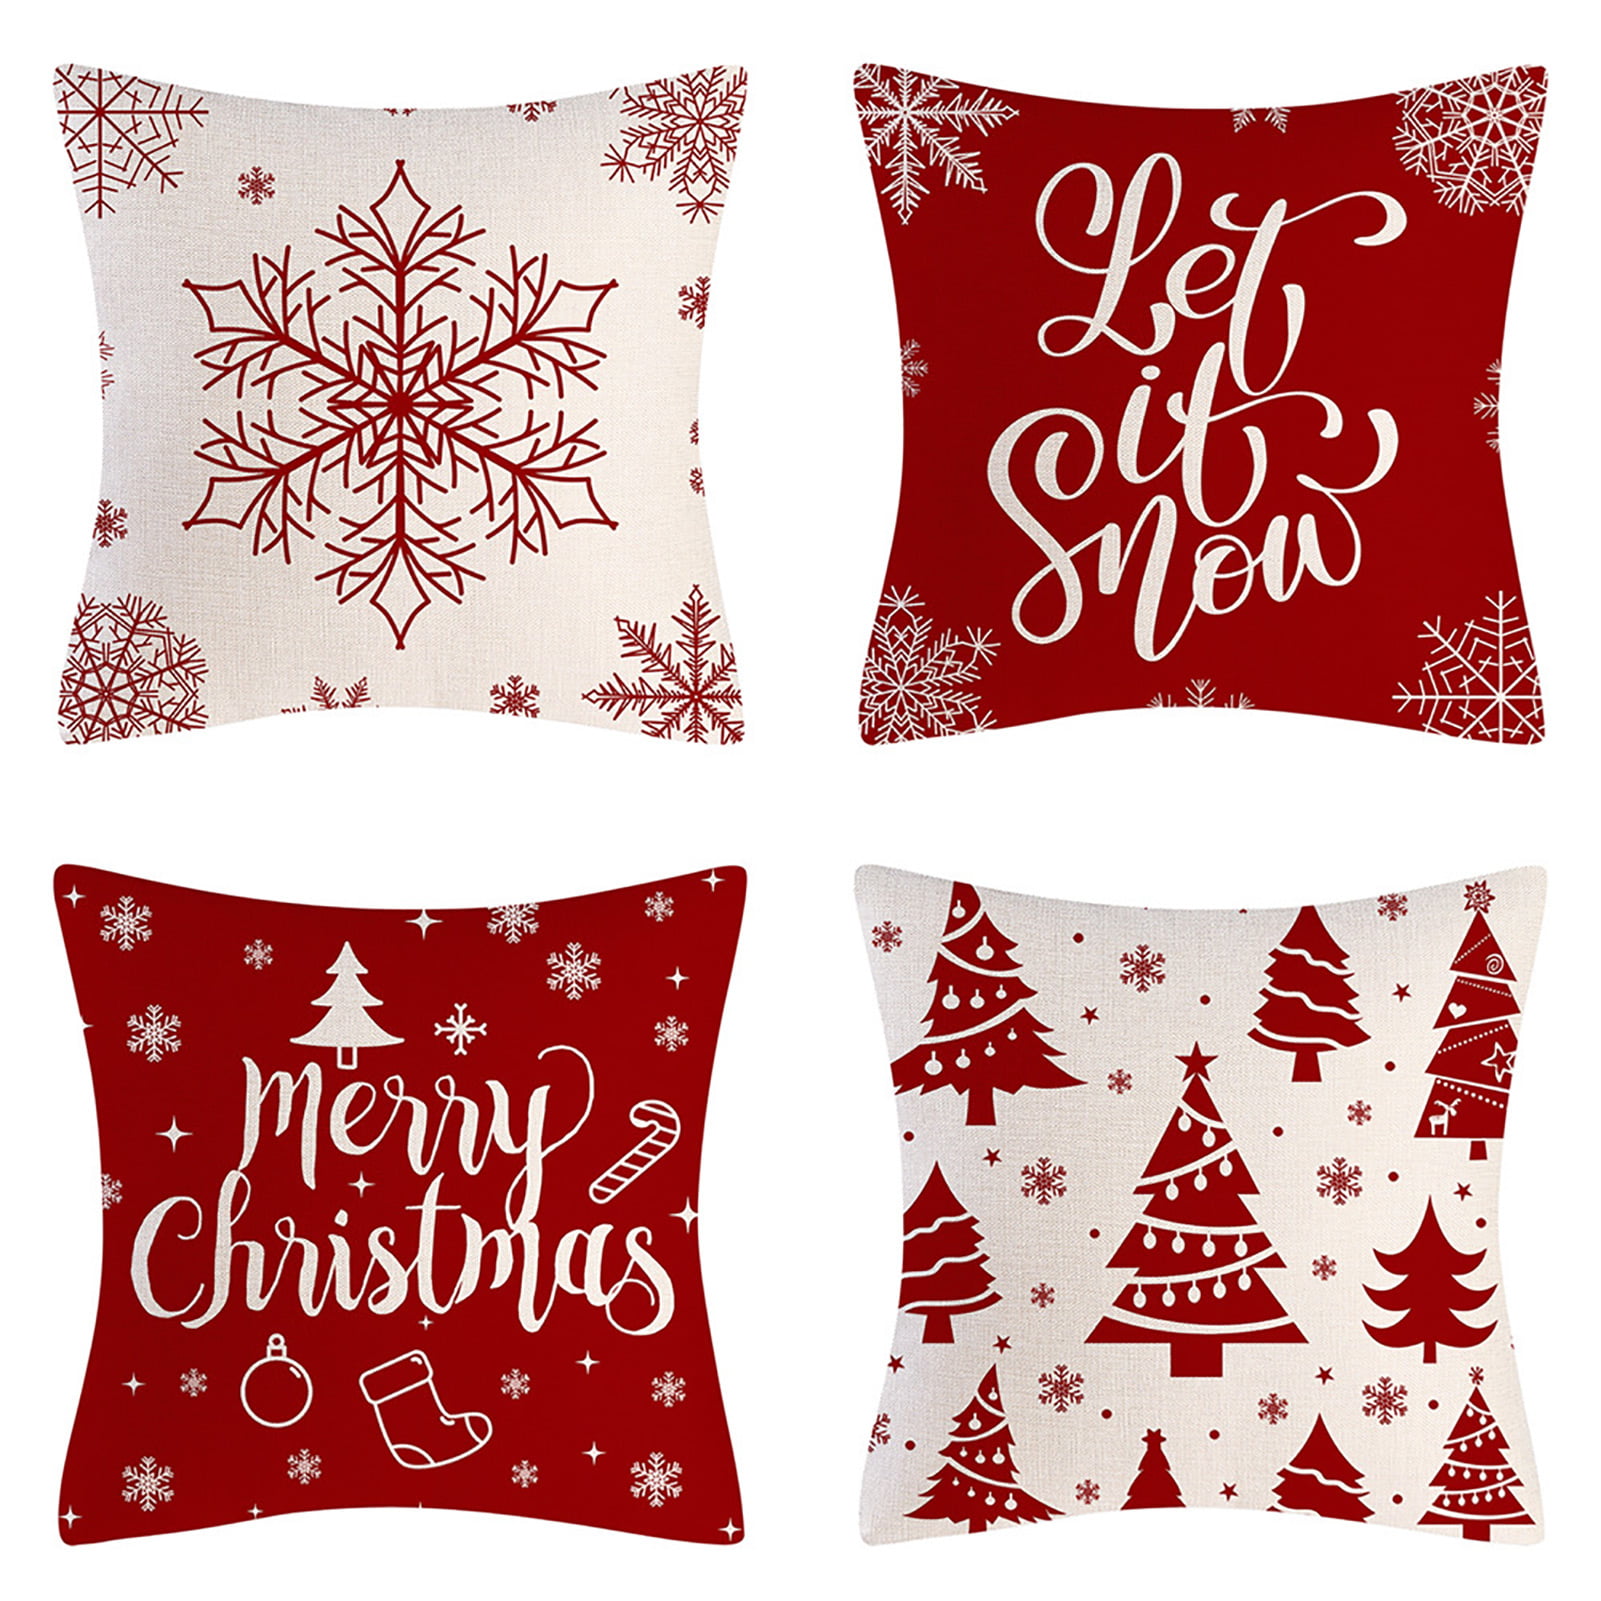 axsl Big Red Snowflakes Pillow Cover Christmas Red Farmhouse Throw Pillow Cover Plaid Cuhion Cover Case for Couch Sofa Home Decoration Farm Christmas Pillows Linen 18 X 18 Inches